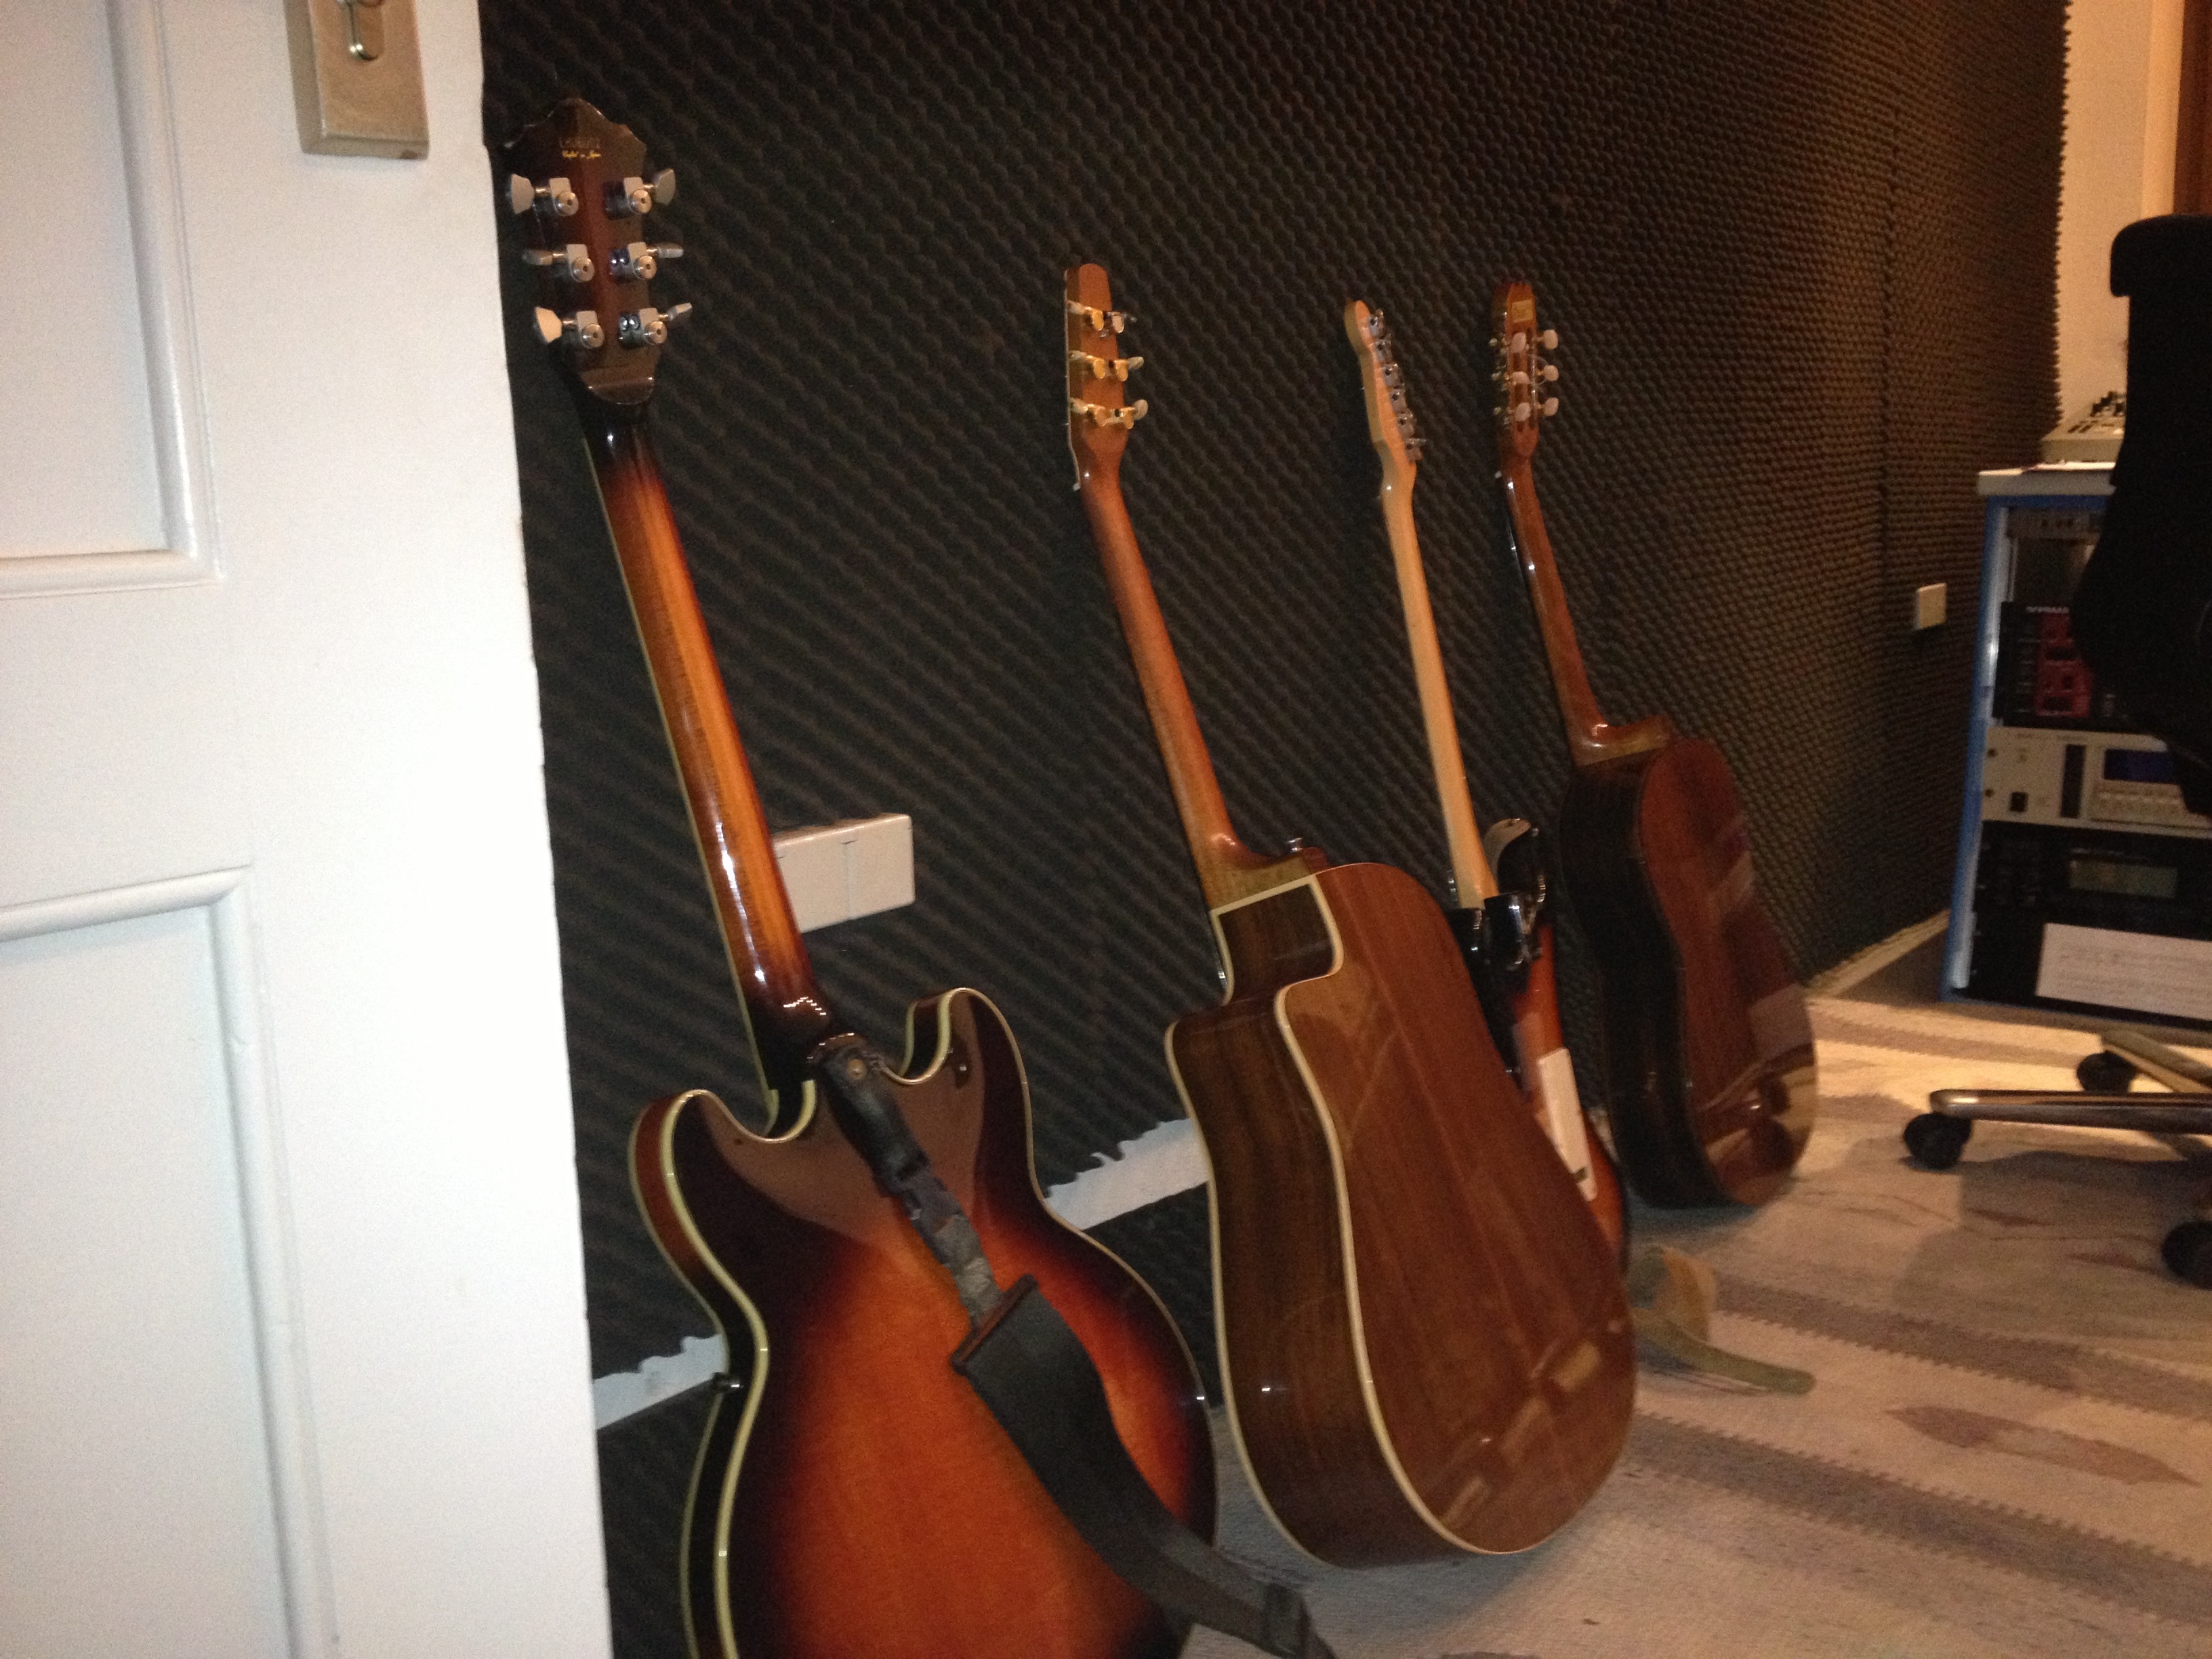 some guitars at CrossRecords